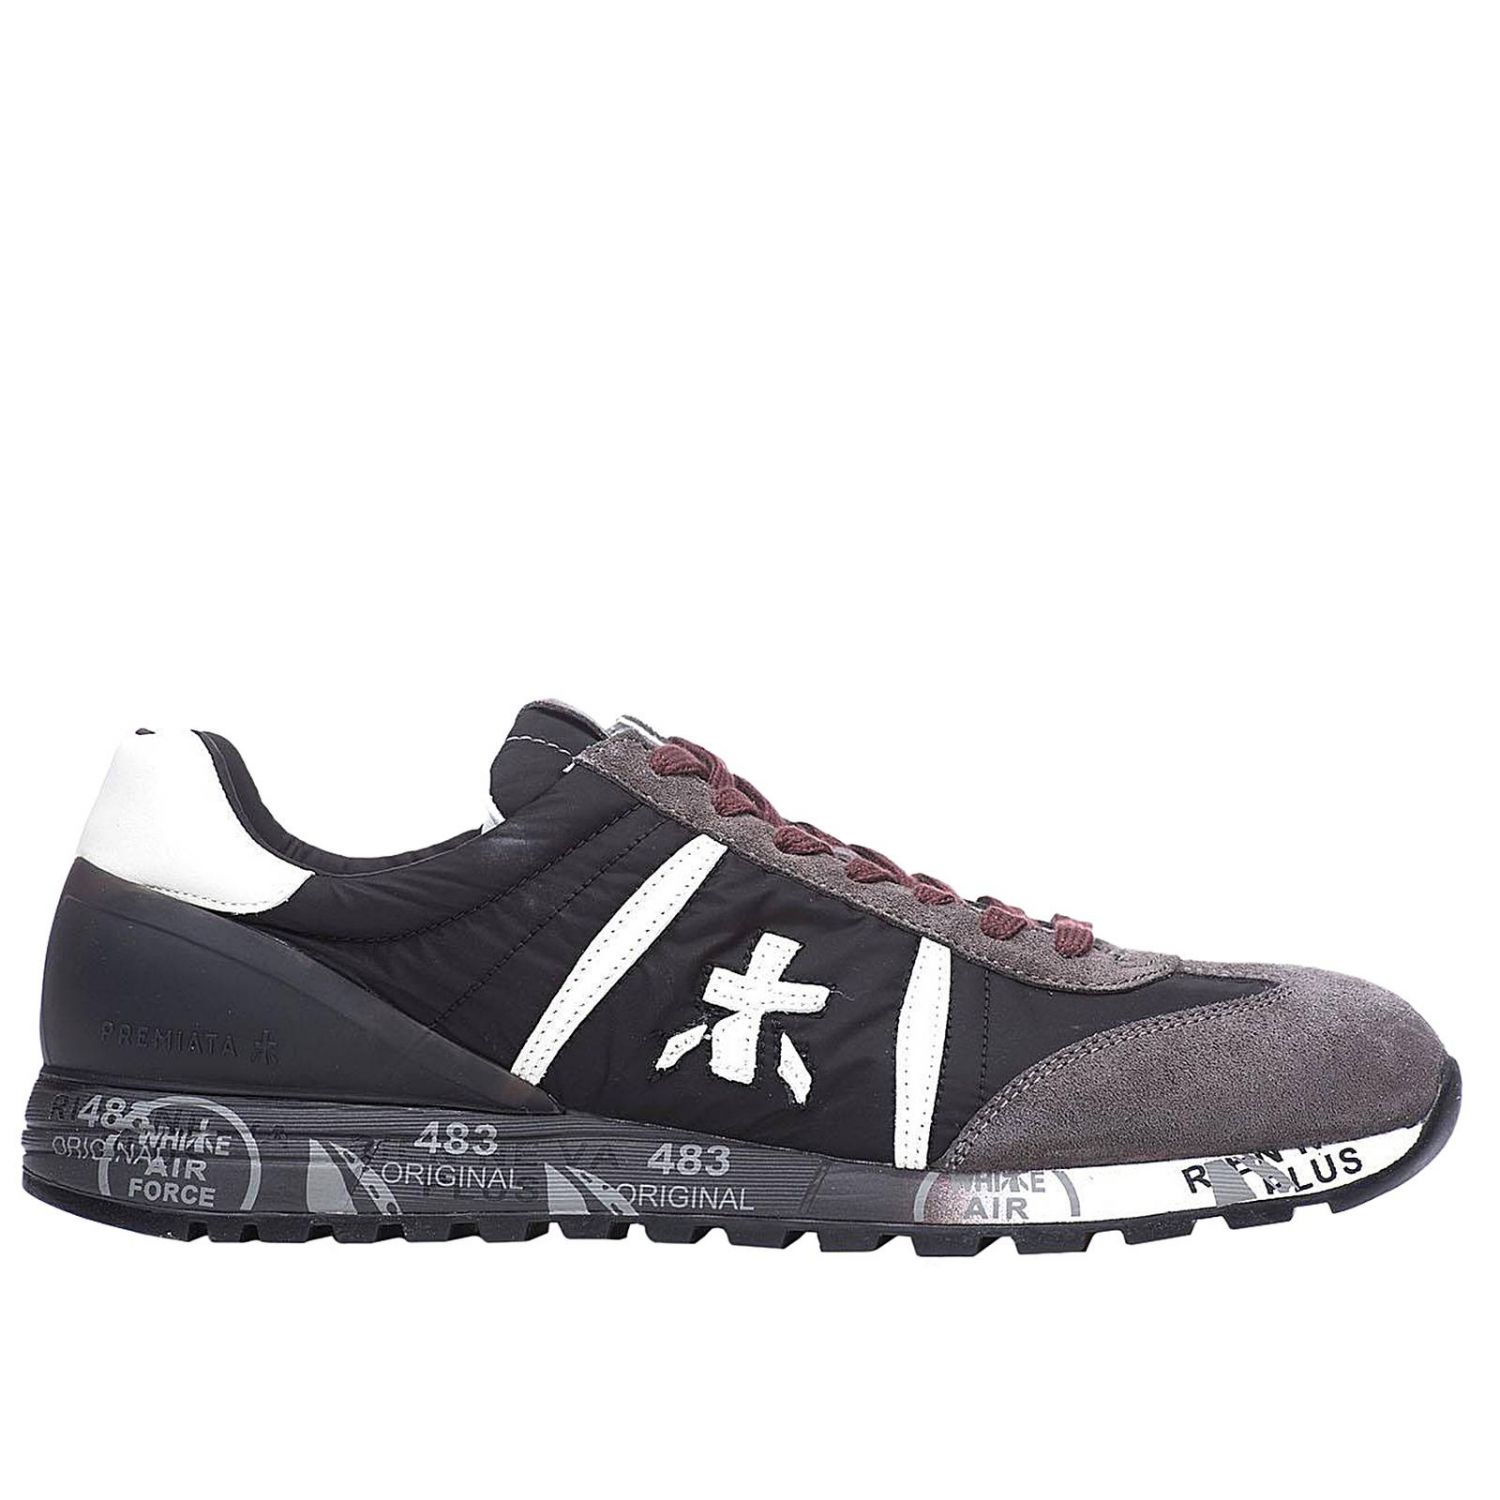 Premiata Outlet: Trainers men - Charcoal | Trainers Premiata LUCY ...